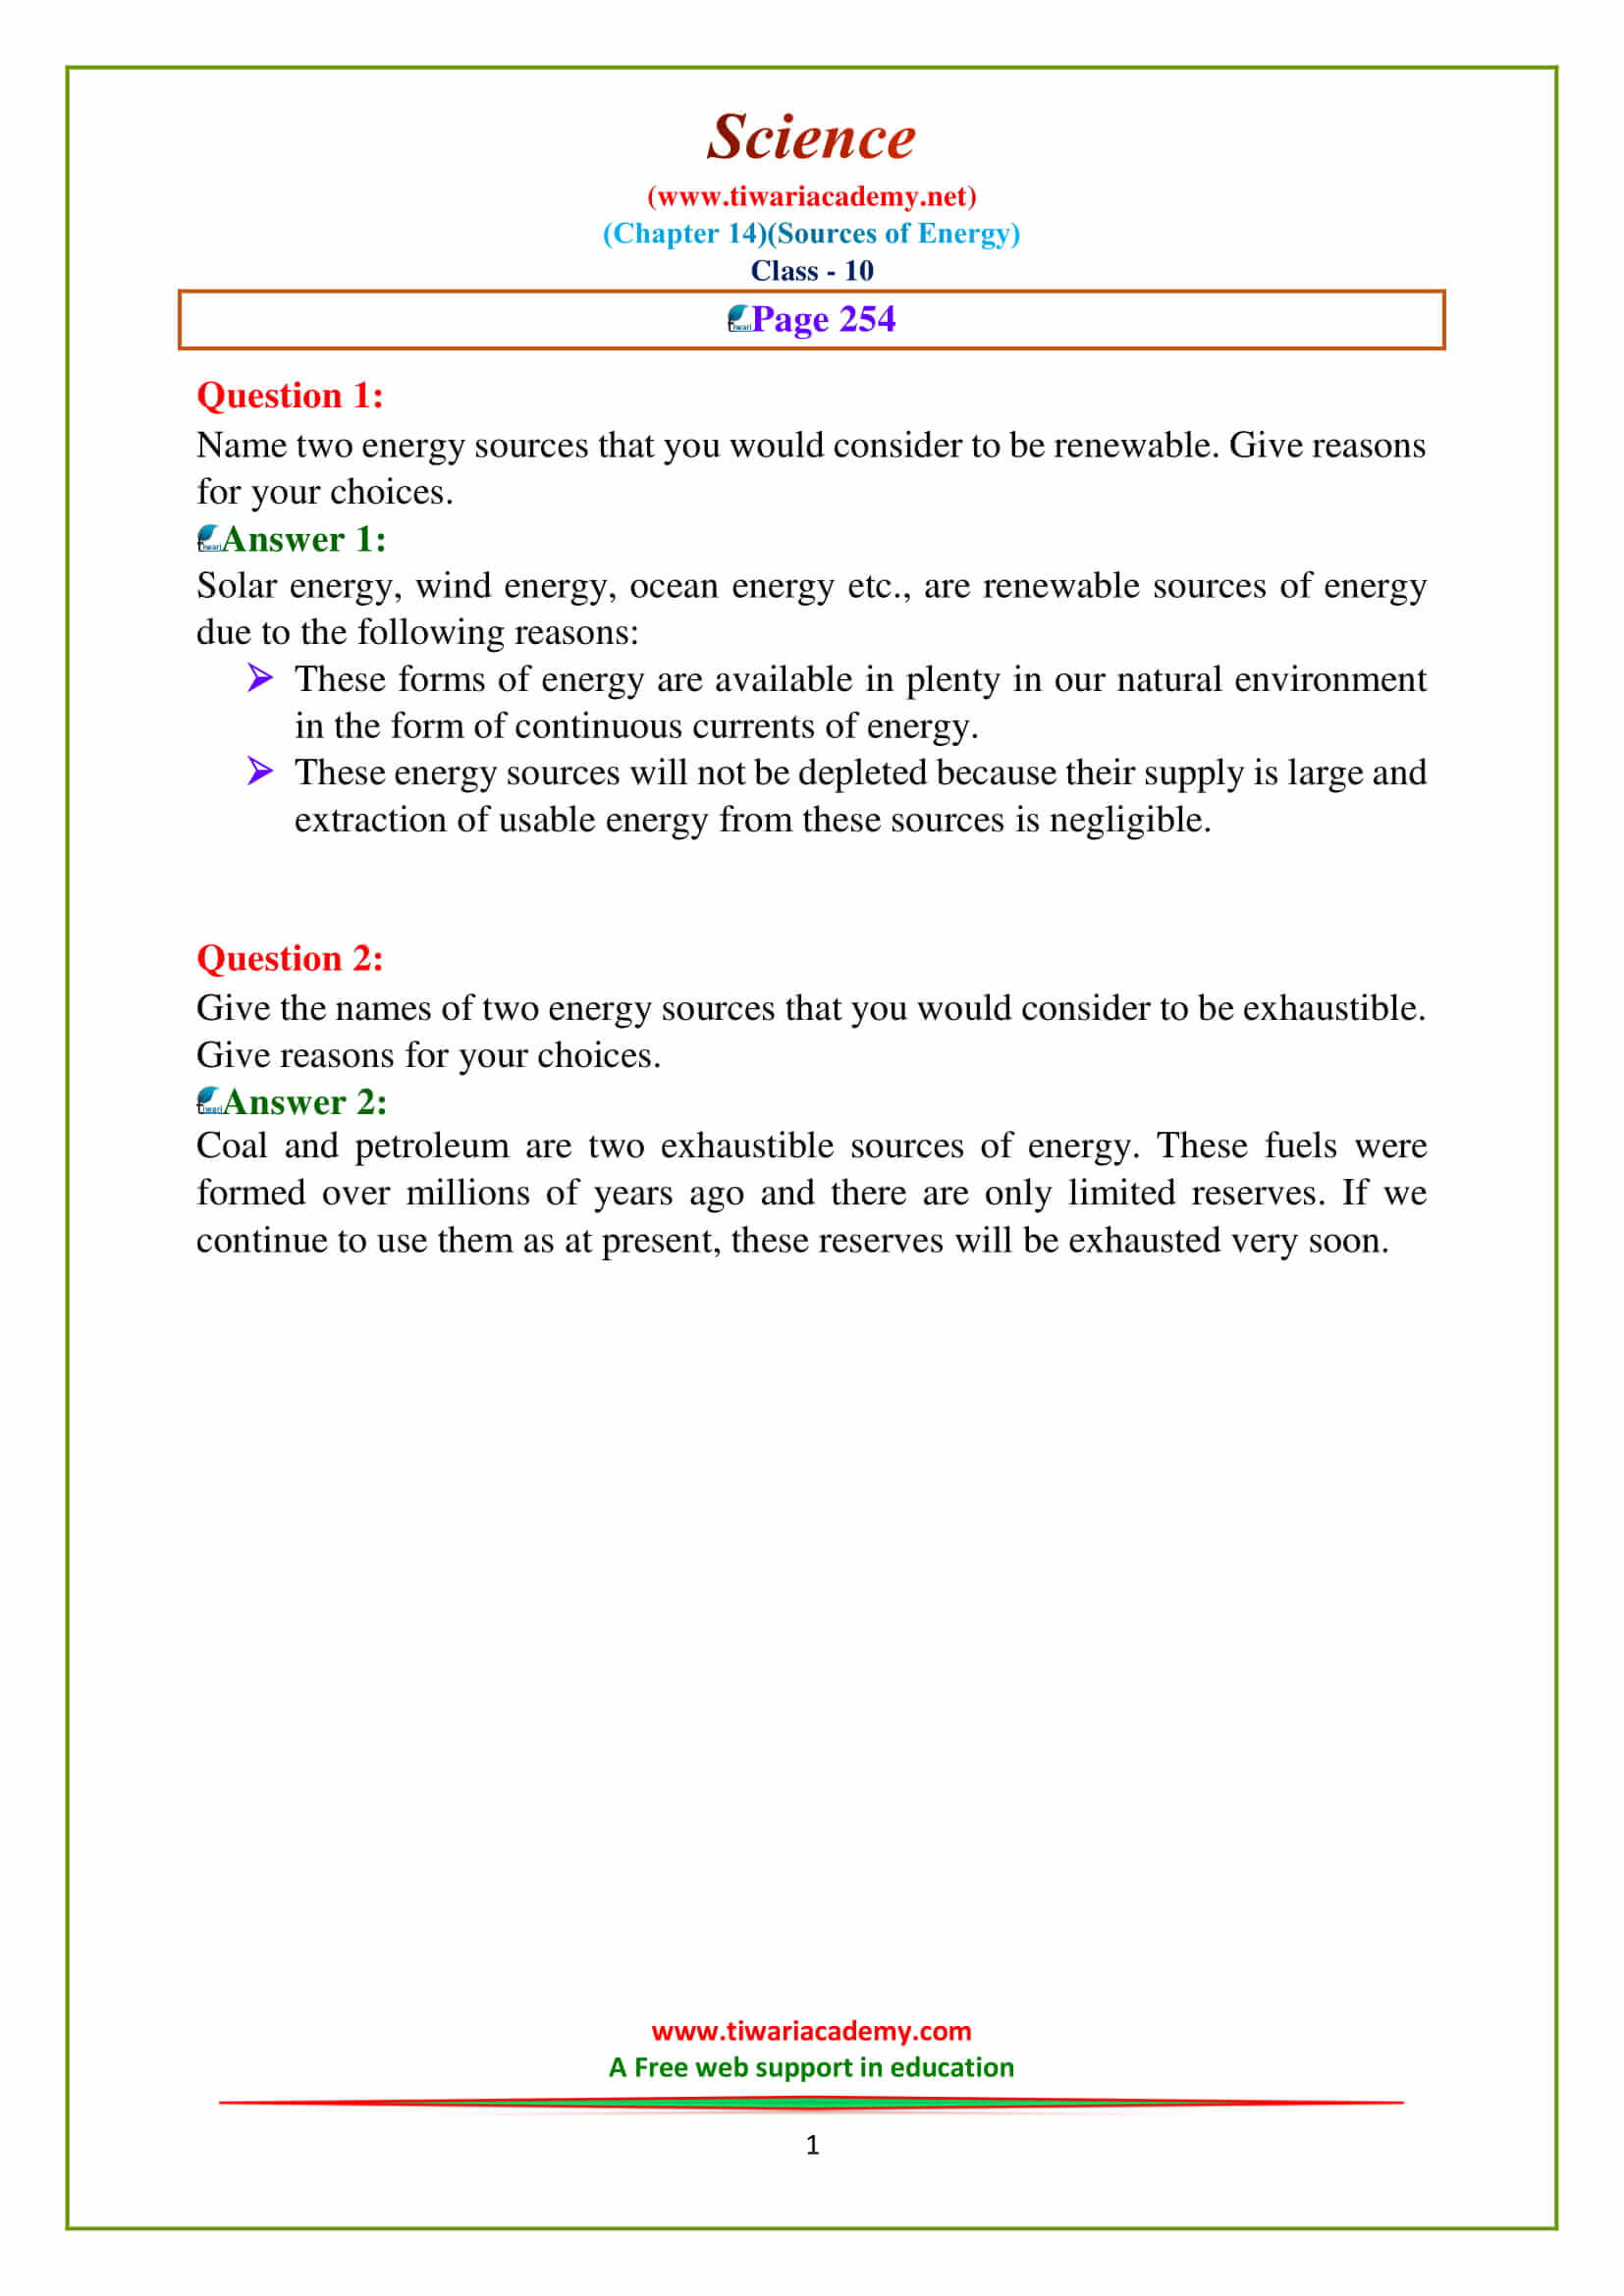 NCERT Solutions for Class 10 Science Chapter 14 Sources of Energy page 254